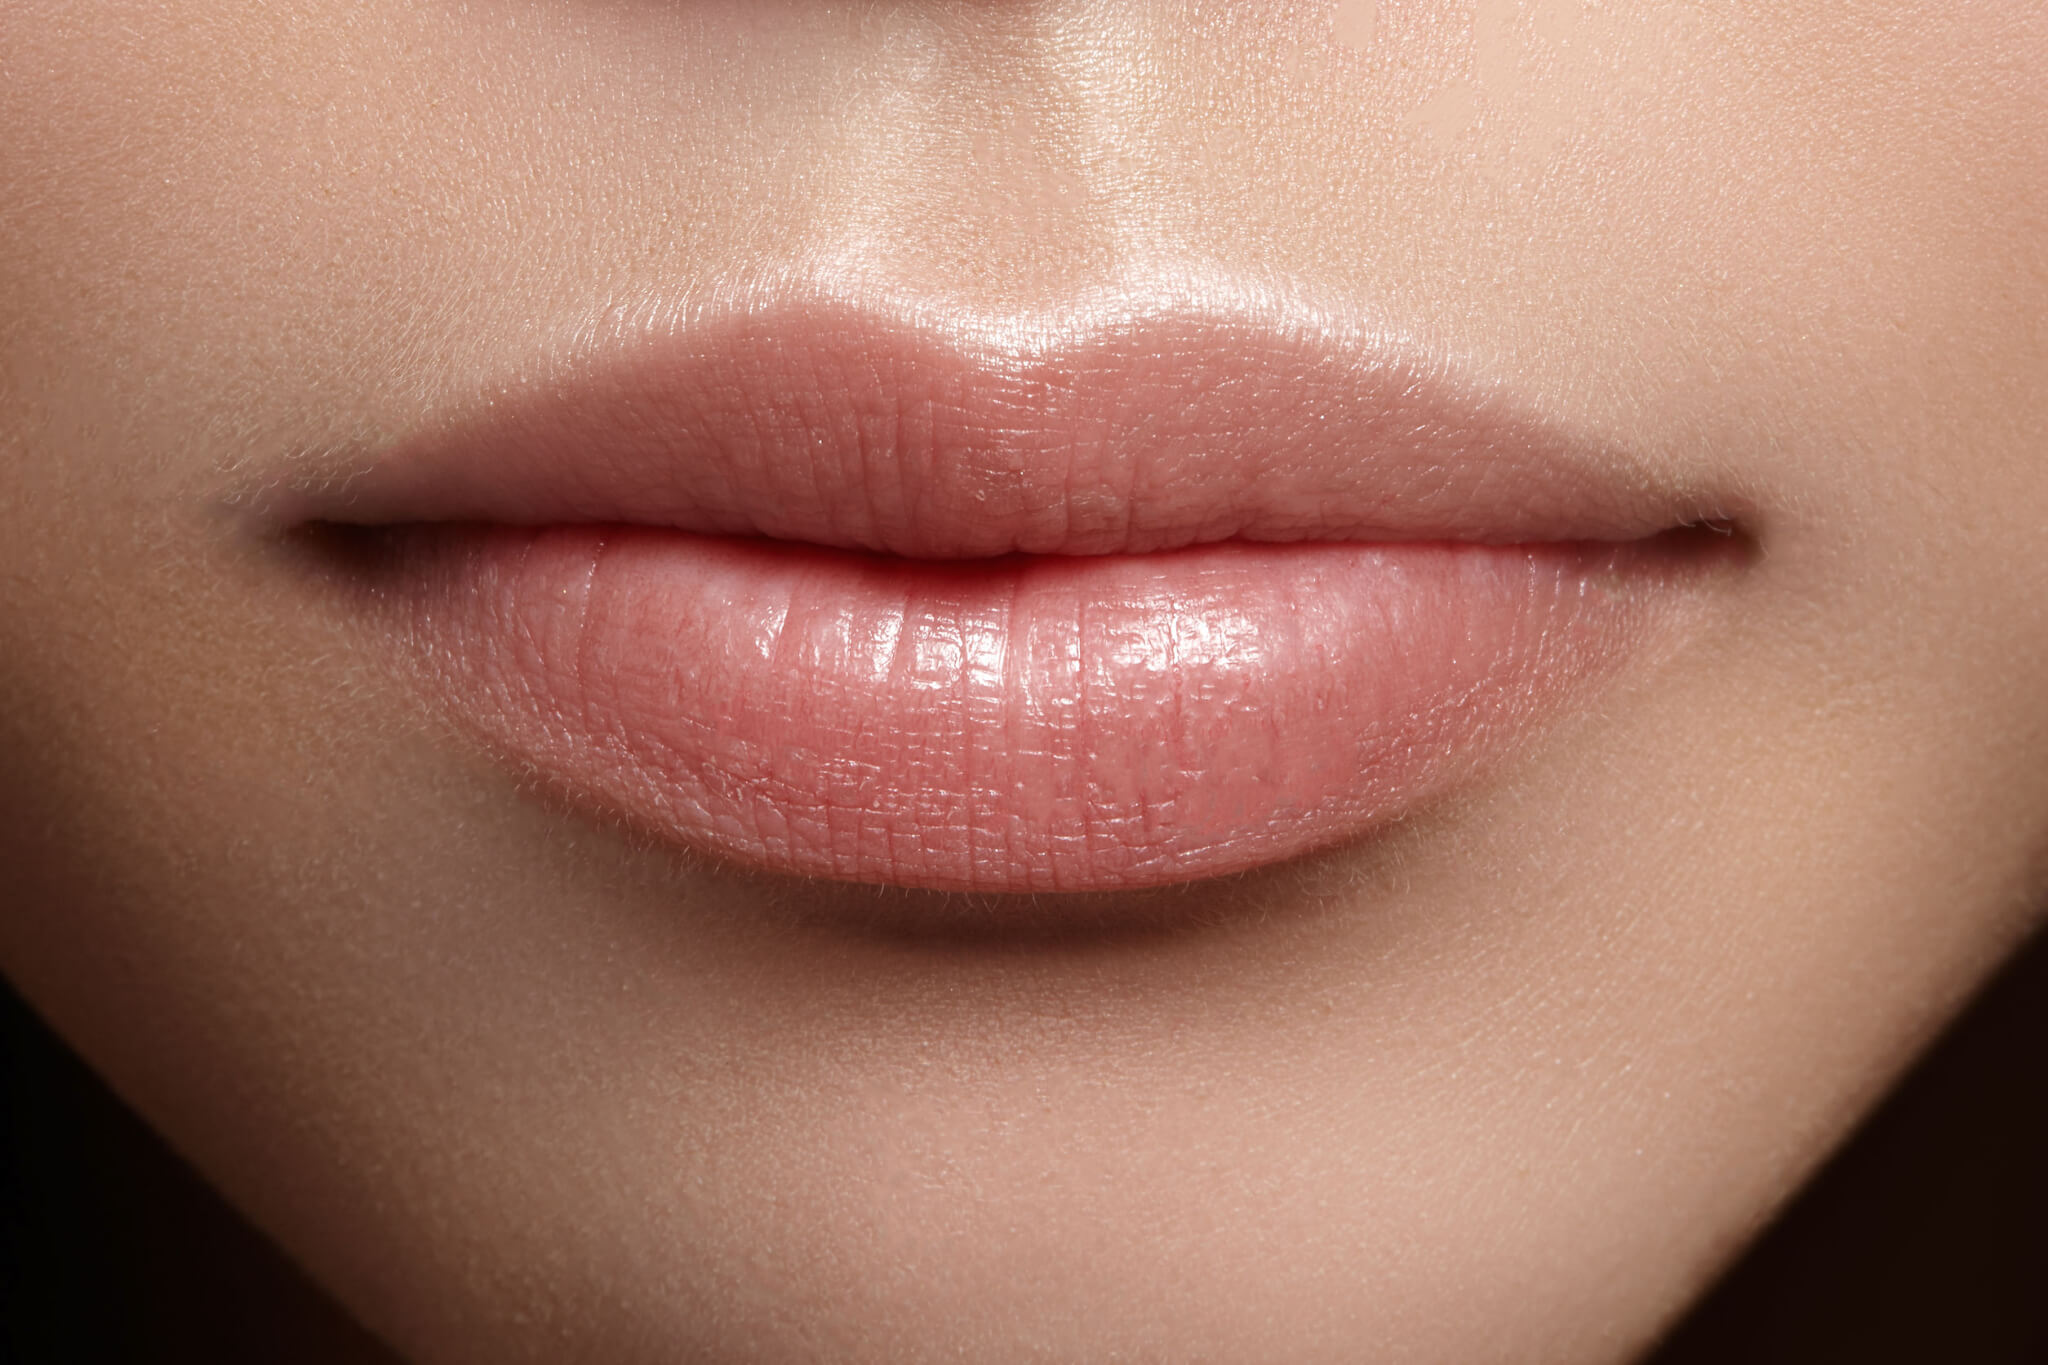 FInger and Associates now offers Kysse- a lip filler that last a year or longer